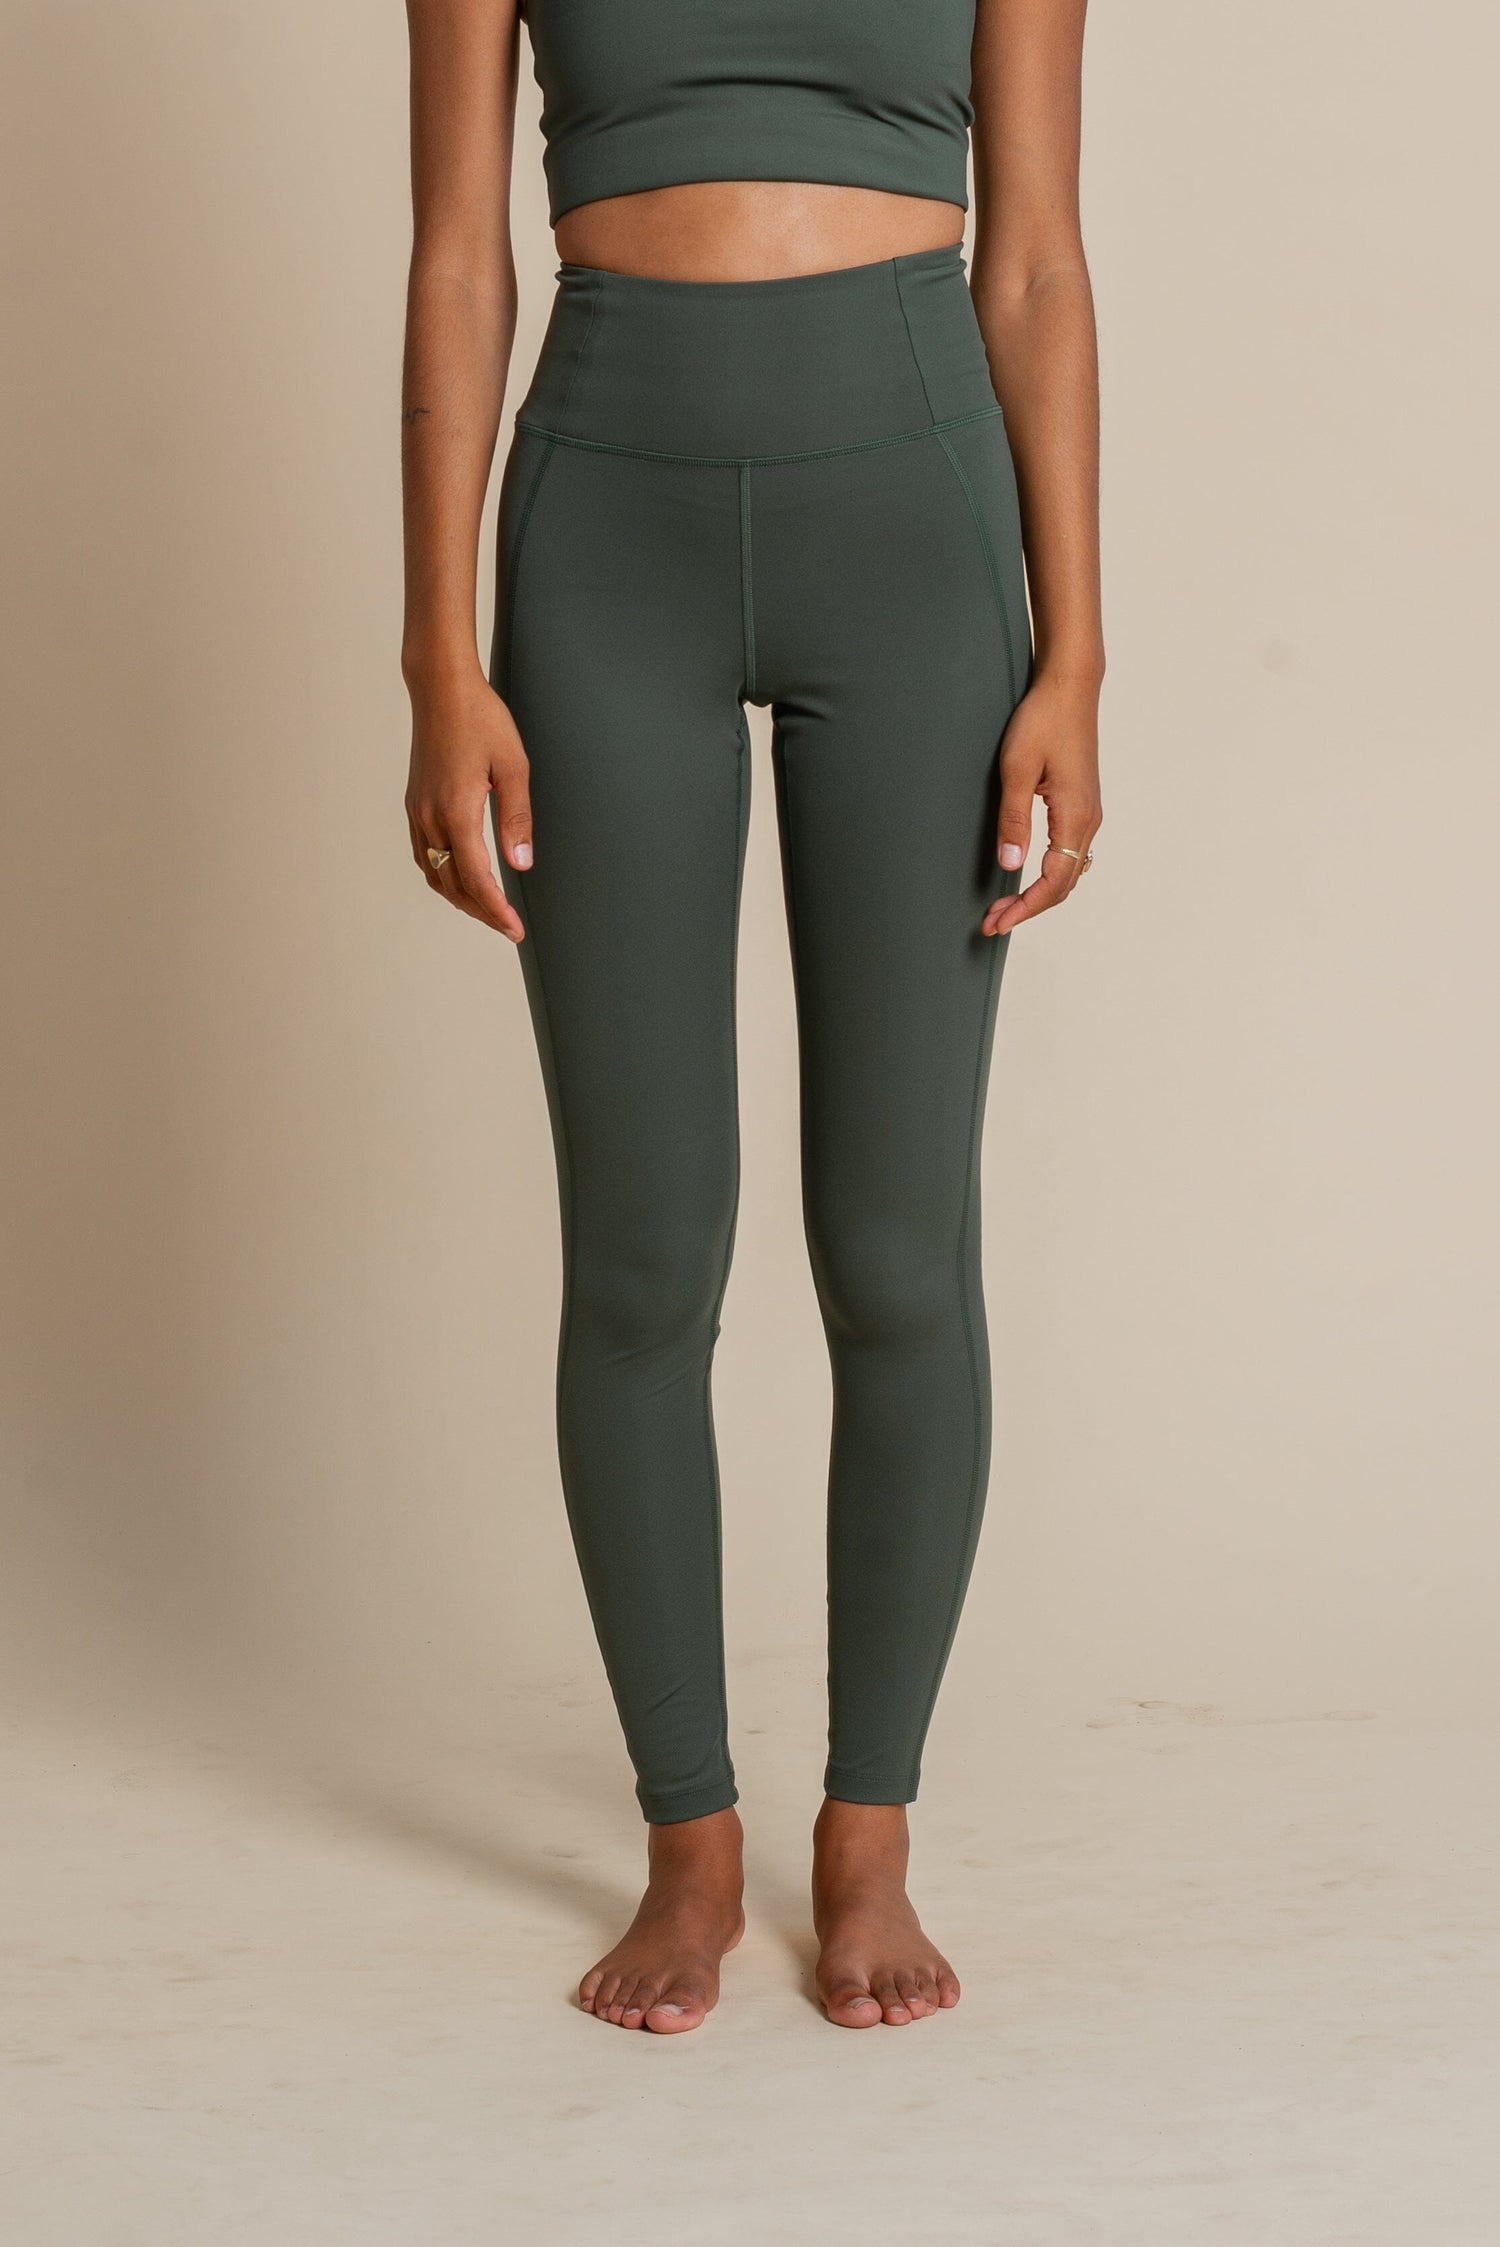 Girlfriend Collective W's Compressive Legging - Limited Colors - Made From Recycled Plastic Bottles Earth Normal Pants